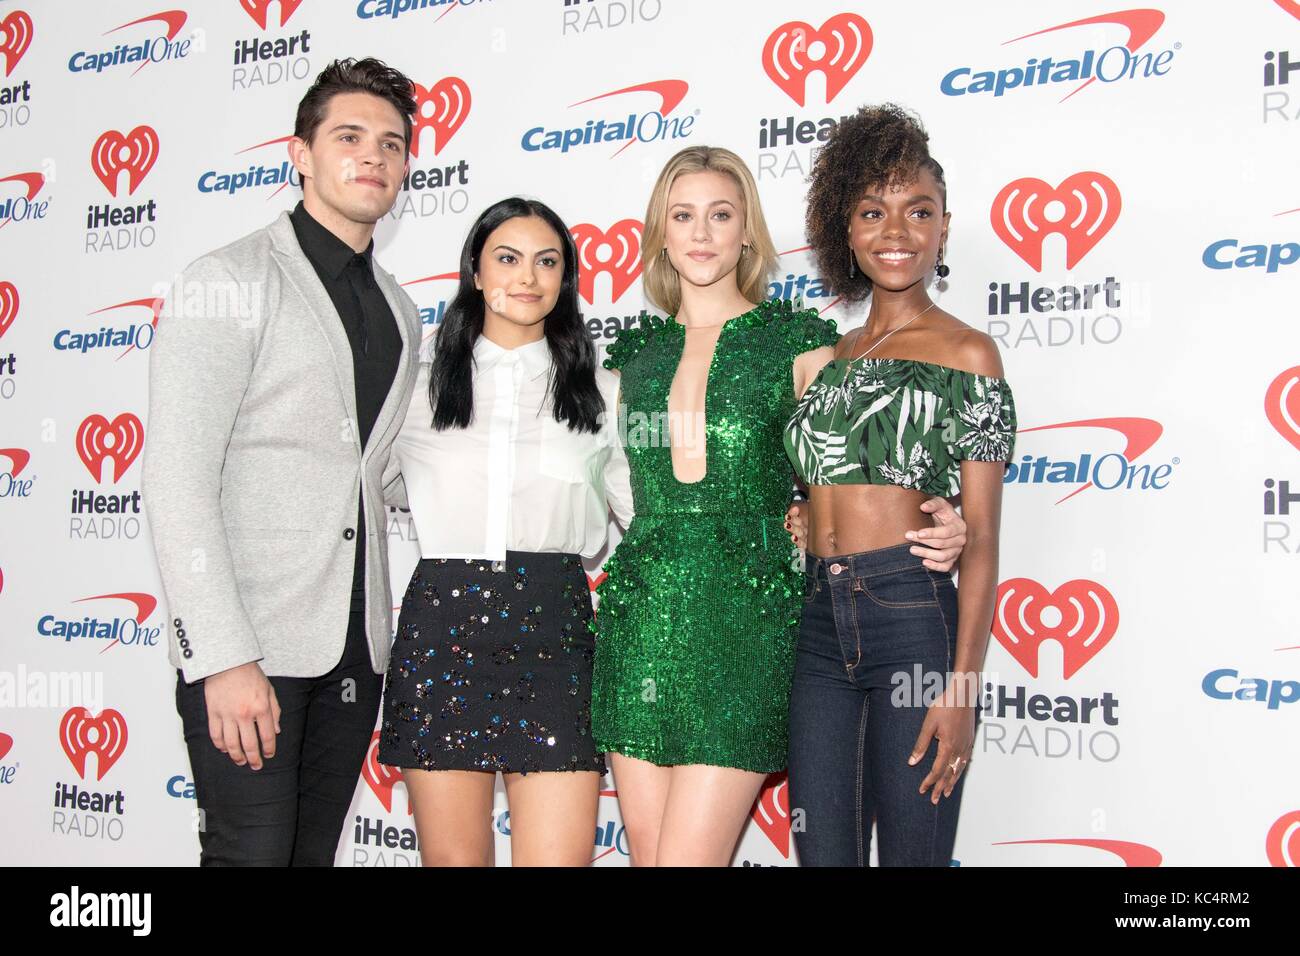 Las Vegas, Nevada, USA. 23rd Sep, 2017. Riverdale cast members CASEY COTT, CAMILA MENDES, LILI REINHART and ASHLEIGH MURRAY on the red carpet during the iHeartRadio Music Festival in Las Vegas, Nevada Credit: Daniel DeSlover/ZUMA Wire/Alamy Live News Stock Photo